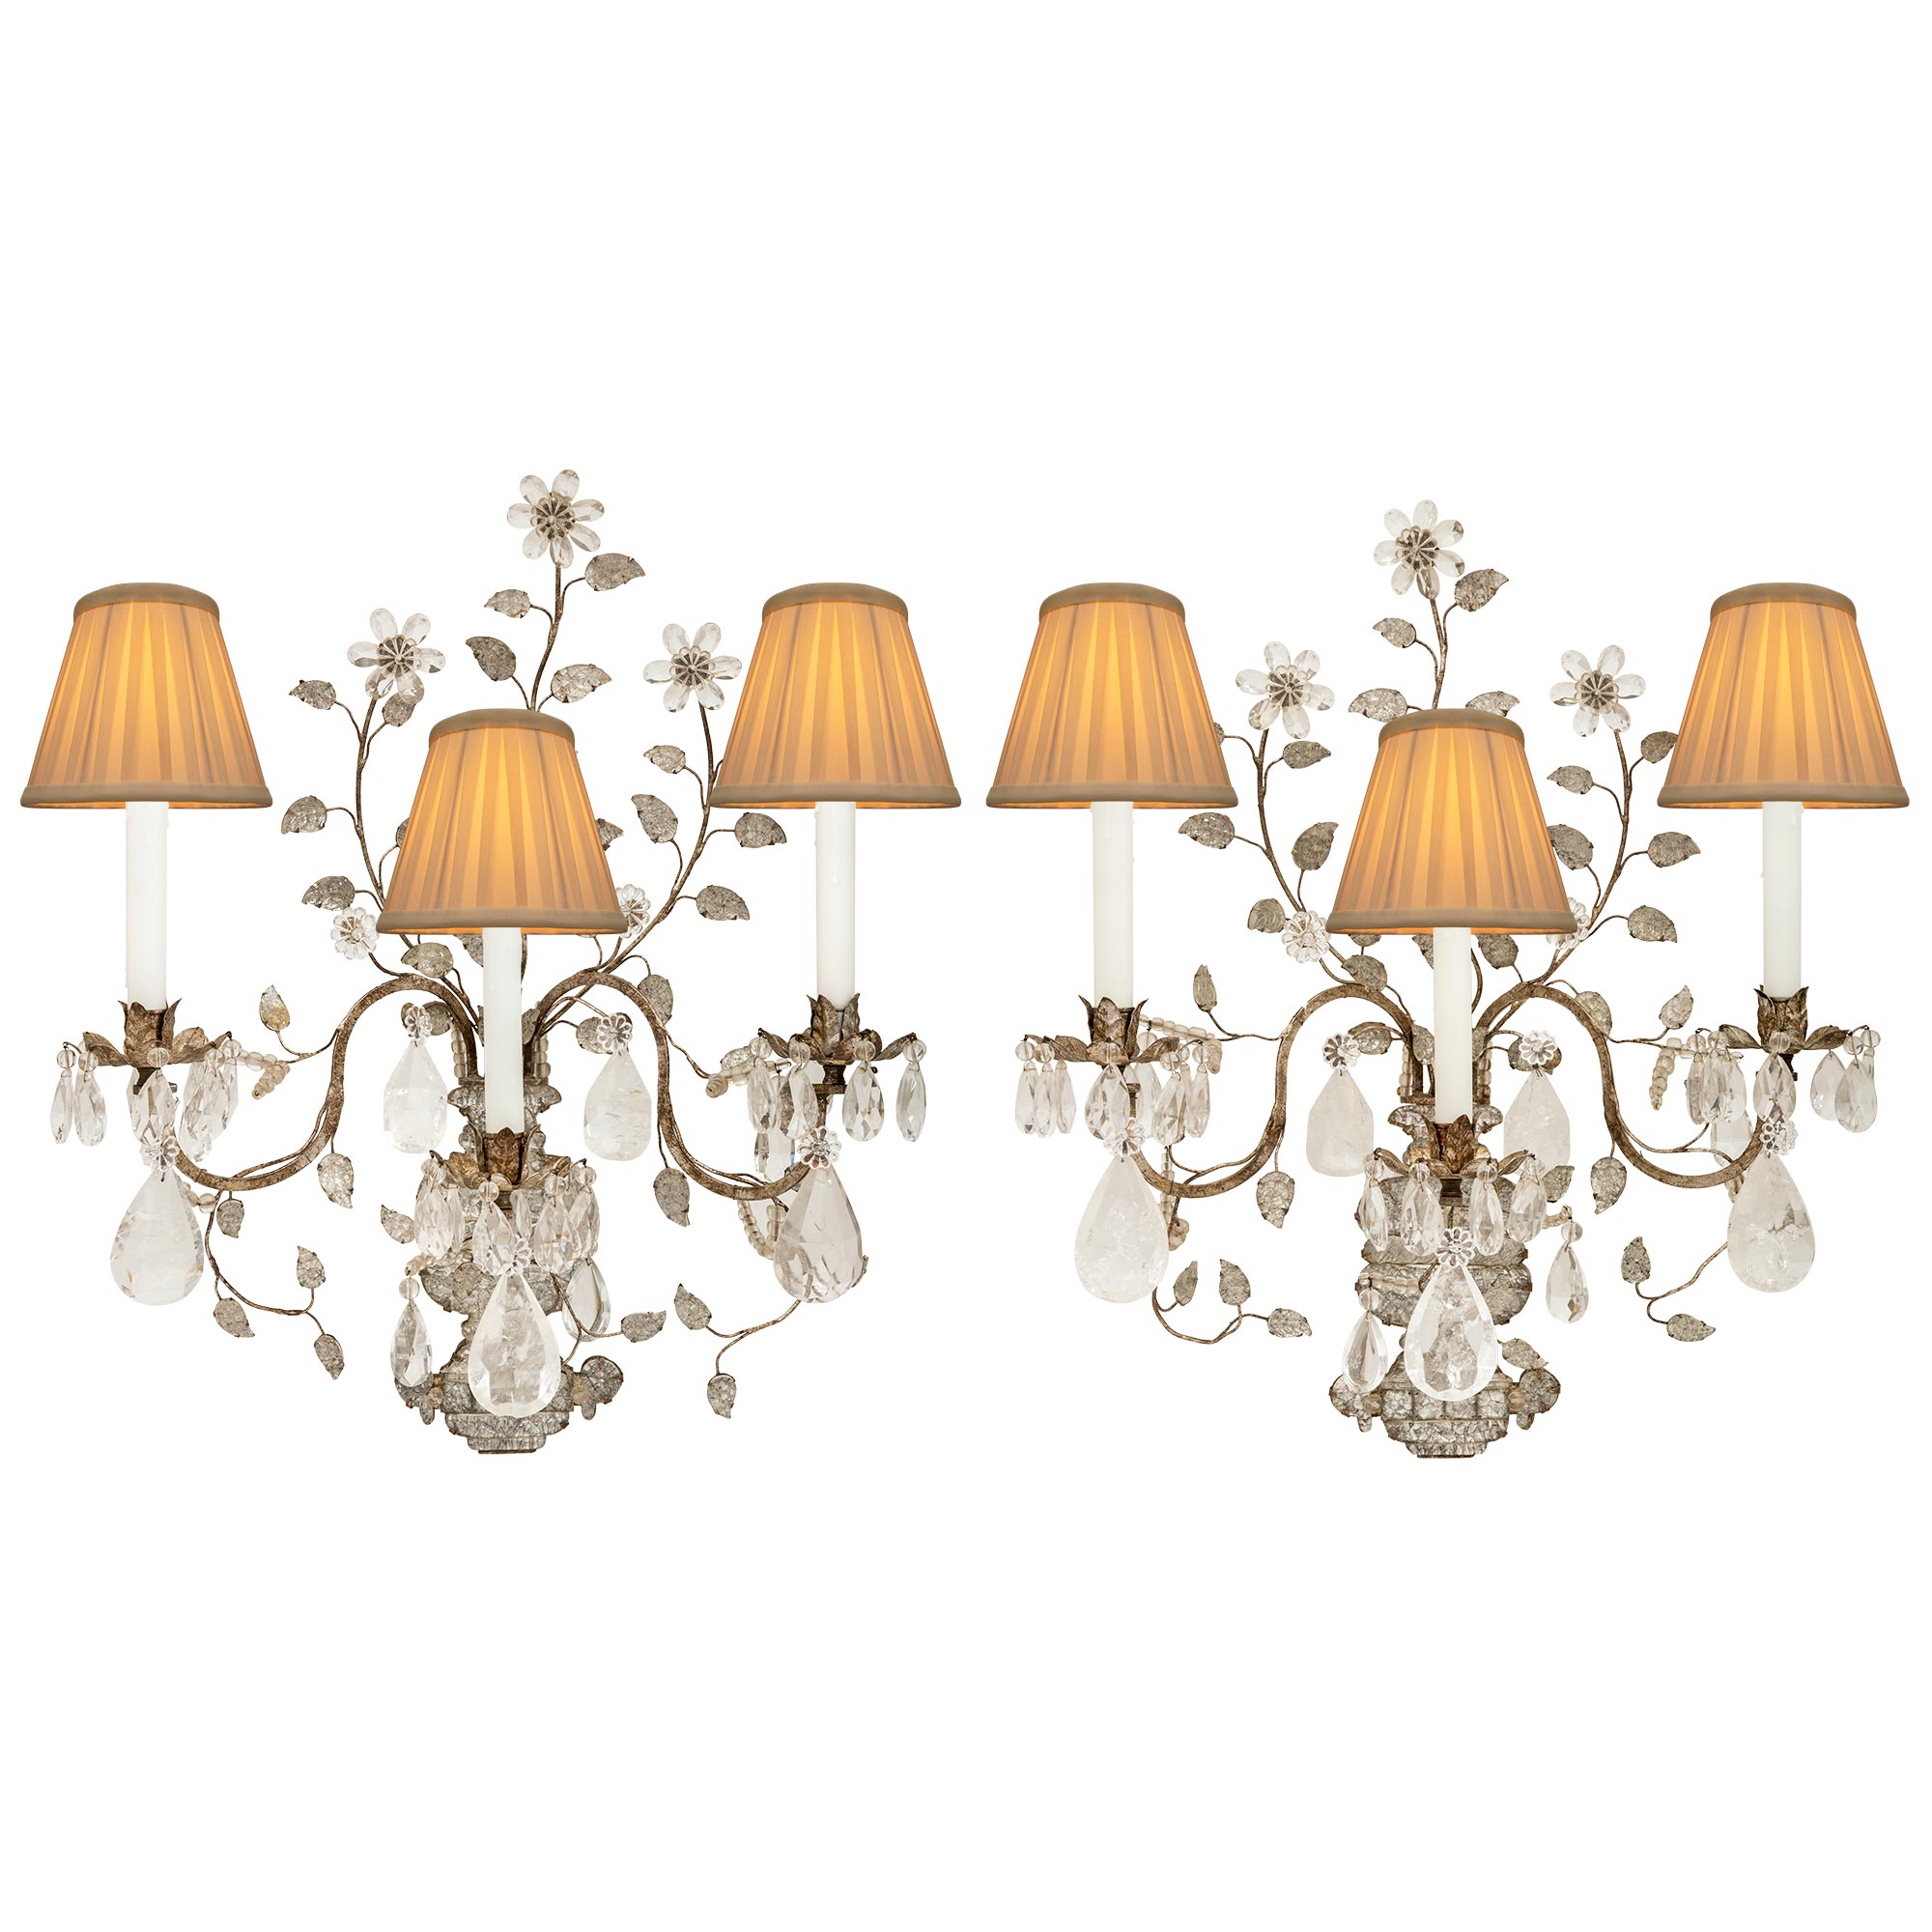 True Pair of French Turn of the Century Louis XVI St. Rock Crystal Sconces